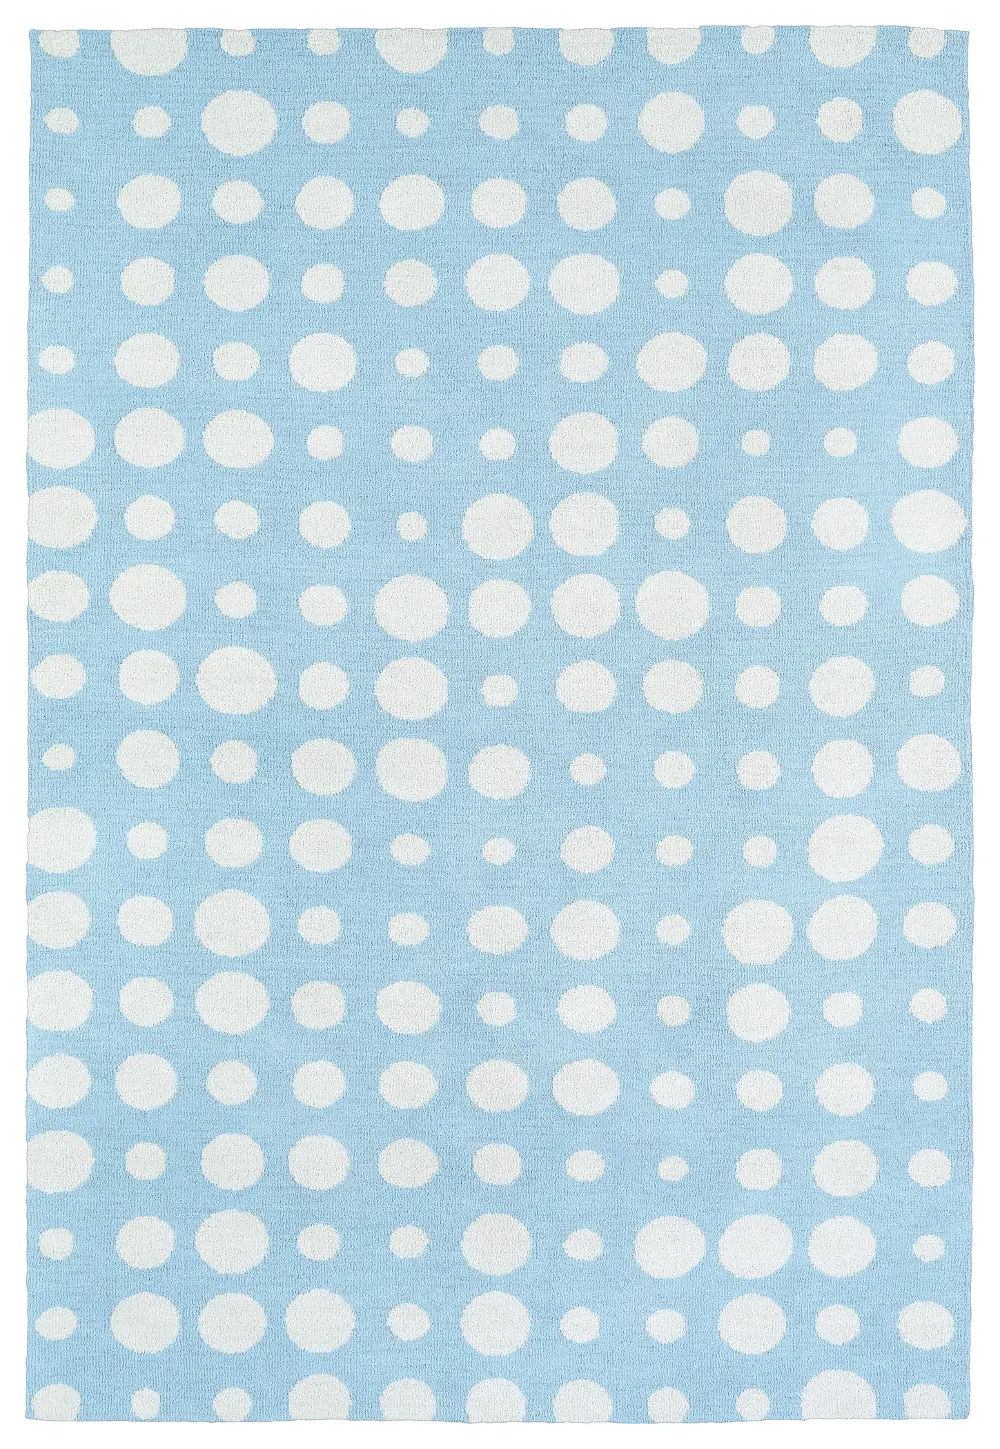 4 x 6 Small Dotted Ivory and Blue Rug - Lily & Liam-1